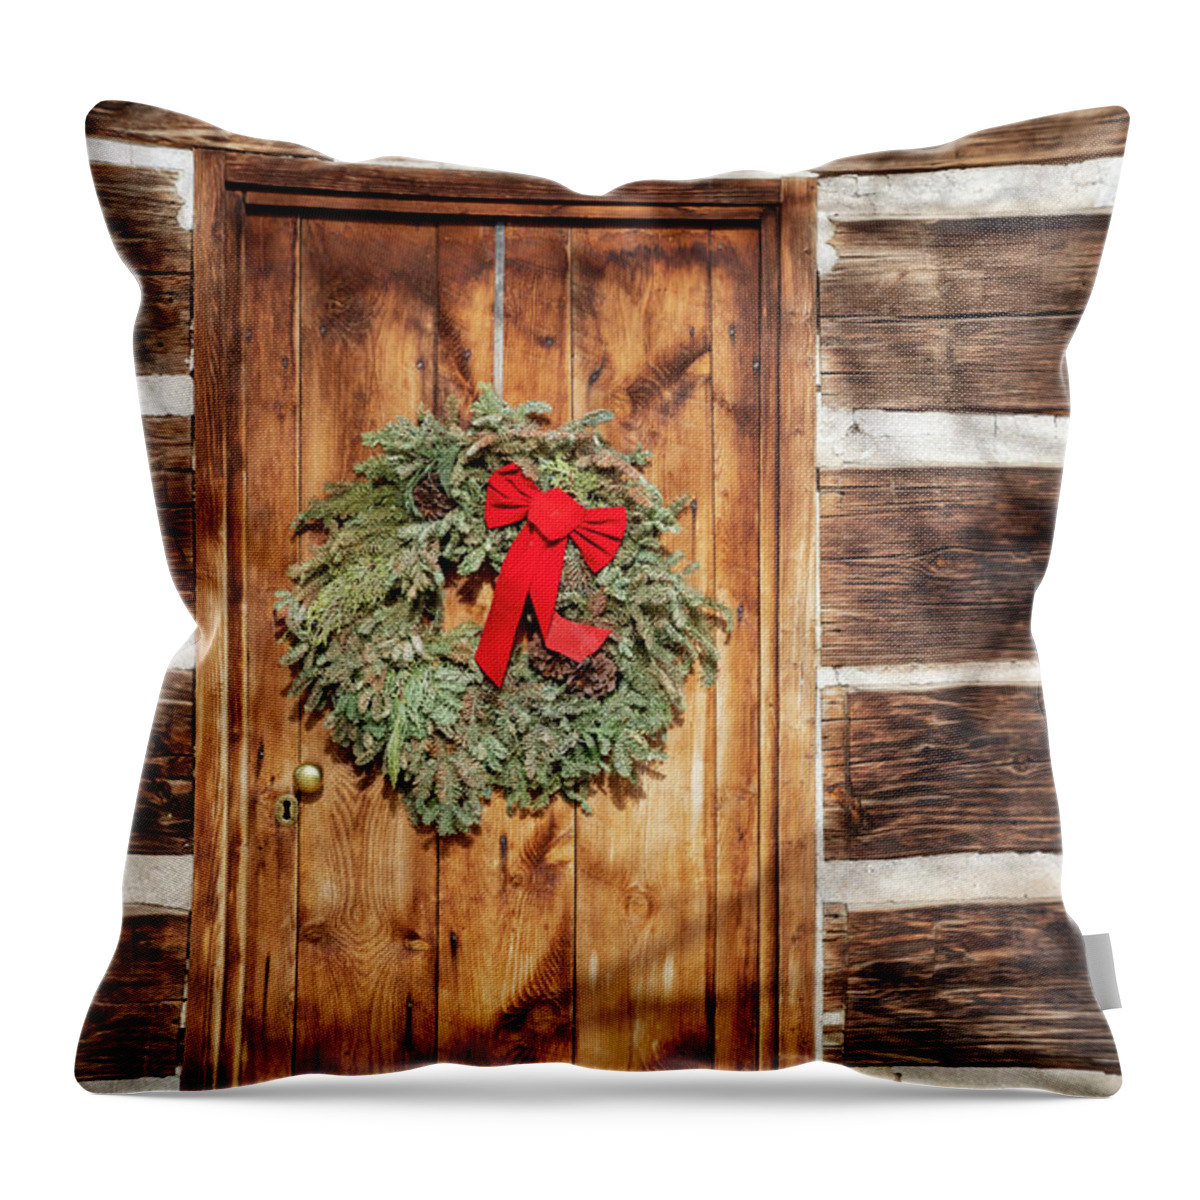 Littleton Museum Throw Pillow featuring the photograph Frontier Christmas by Jim West